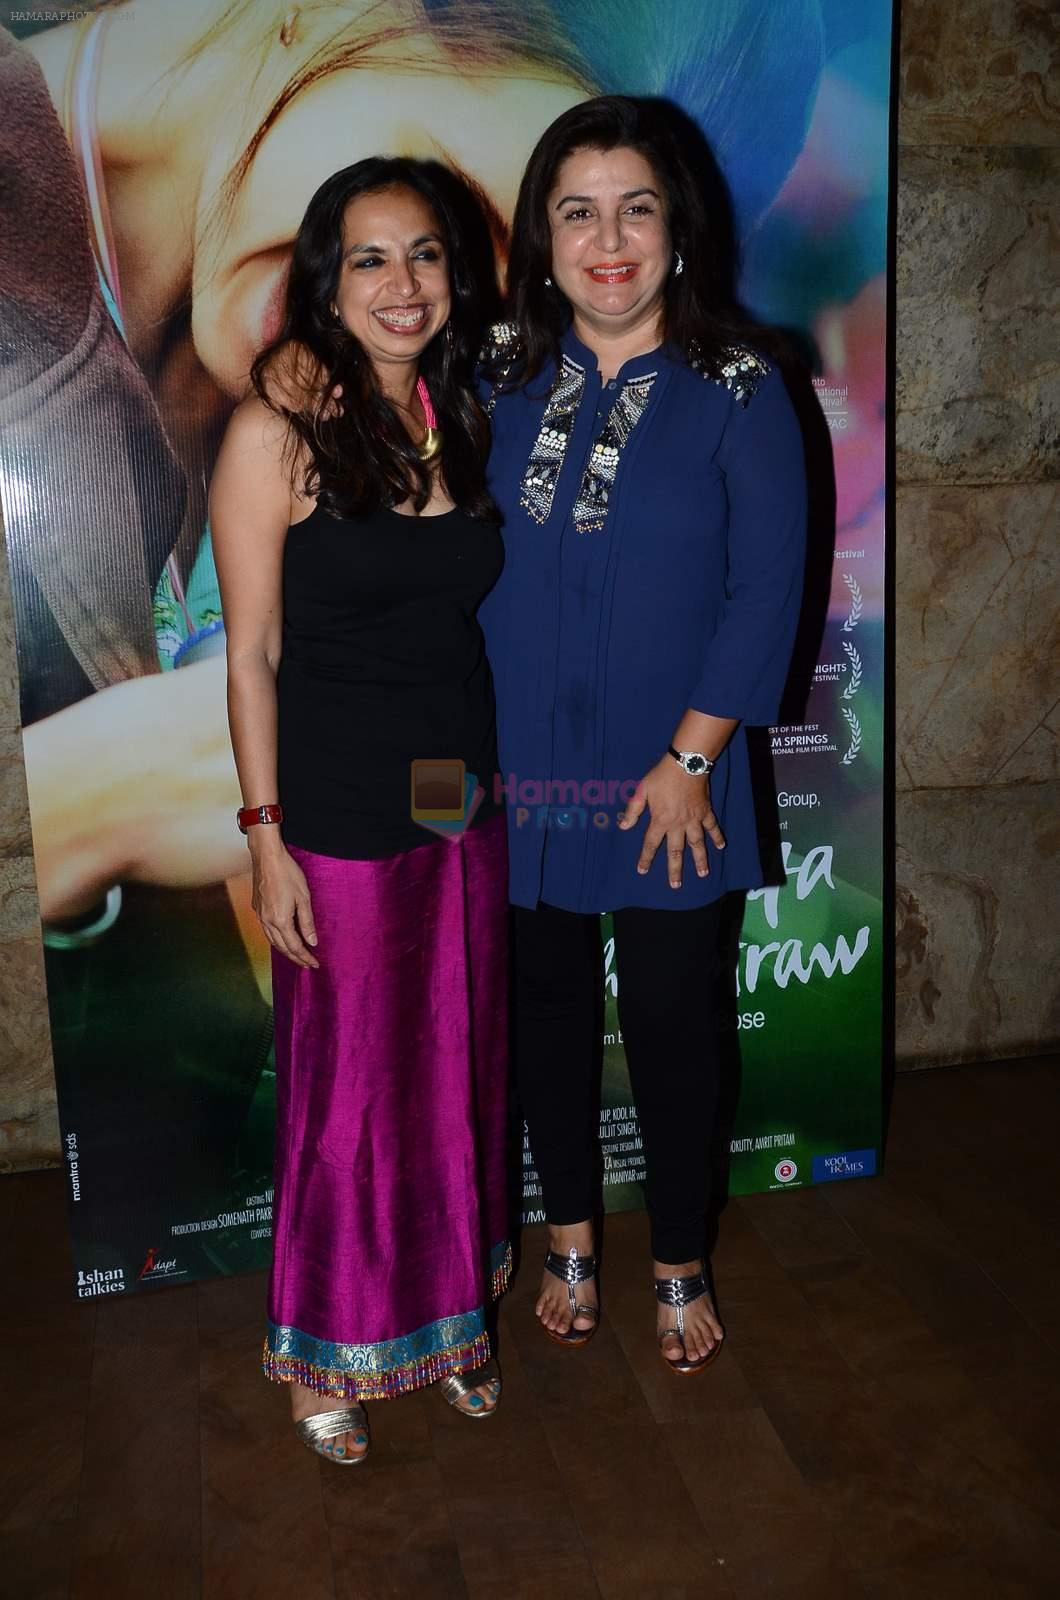 Farah Khan, Shonali Bose  at the special screening of Margarita With A Straw in Lightbox on 13th April 2015